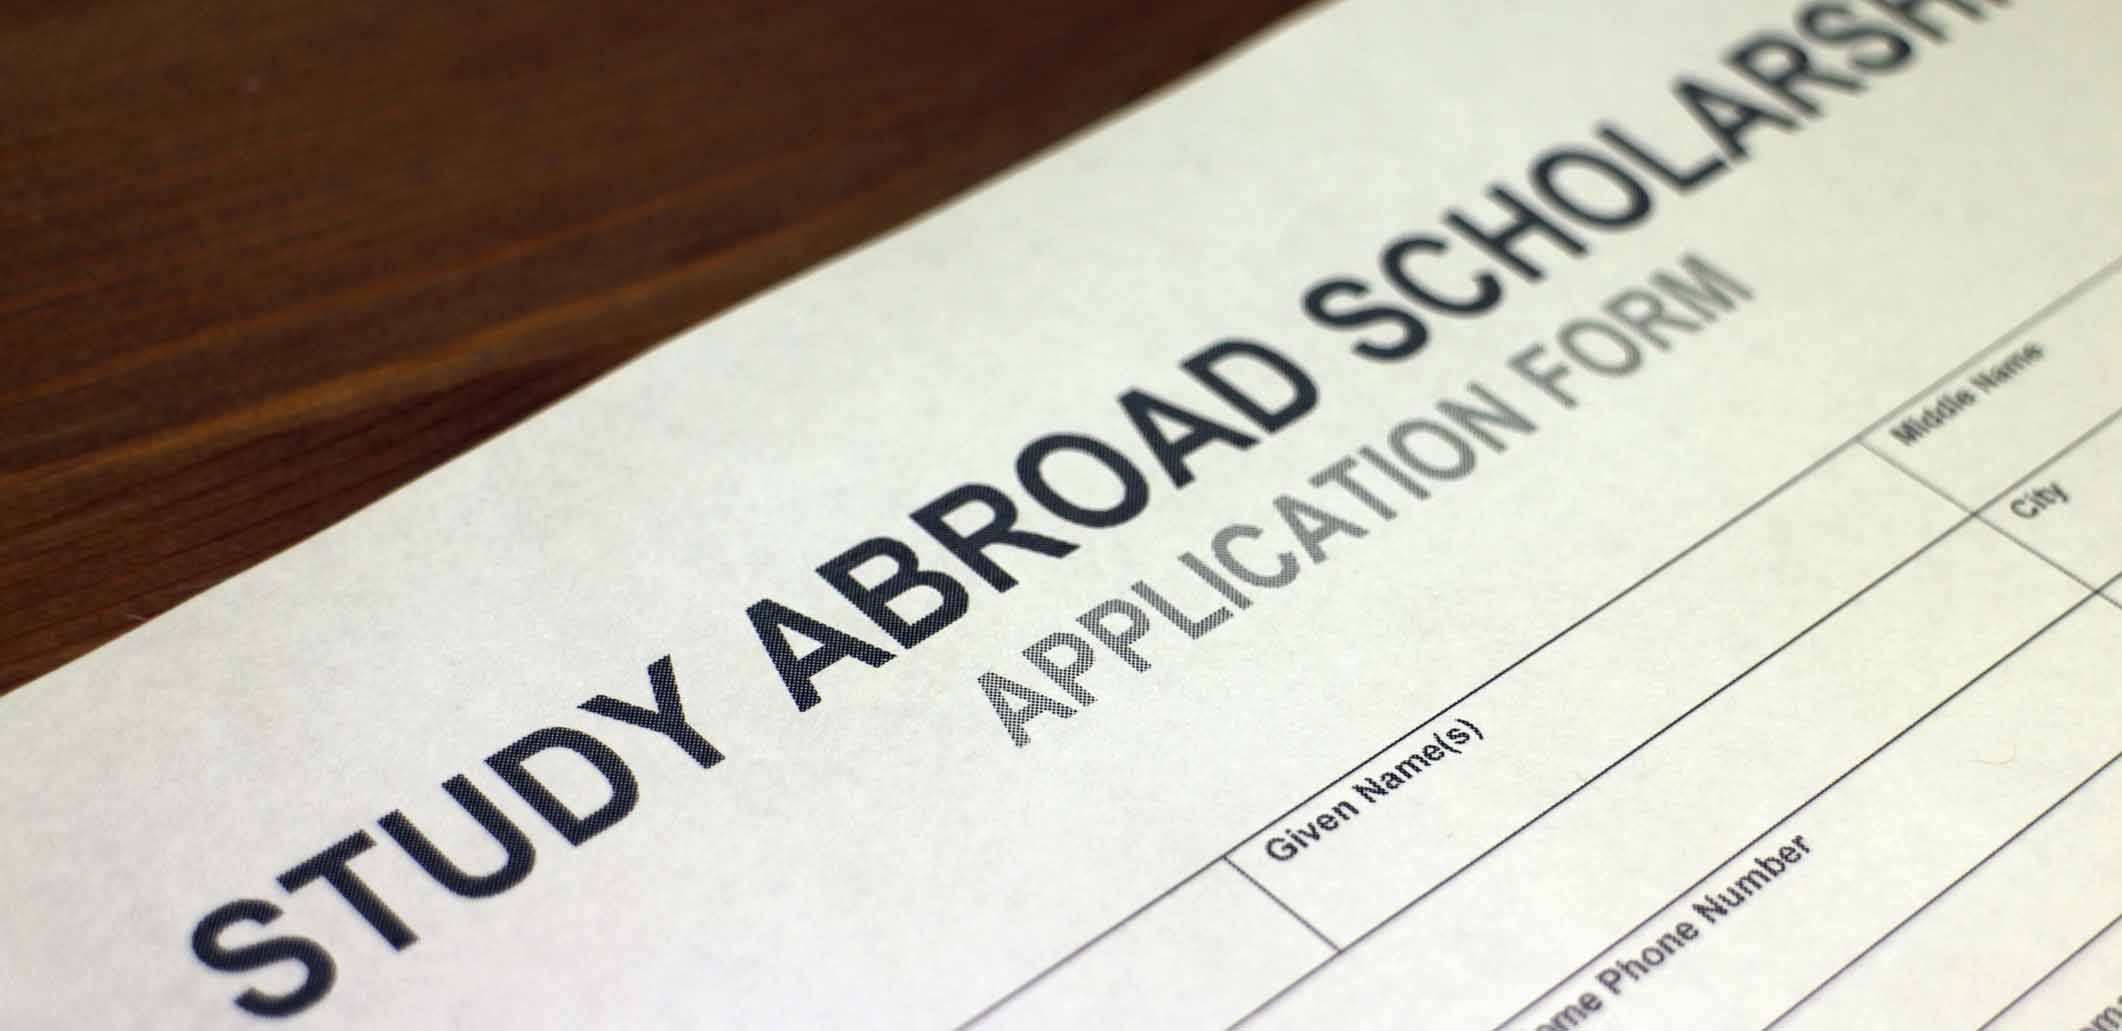 Attention Students That Don’t Think They Can Study Abroad!! YOU CAN.